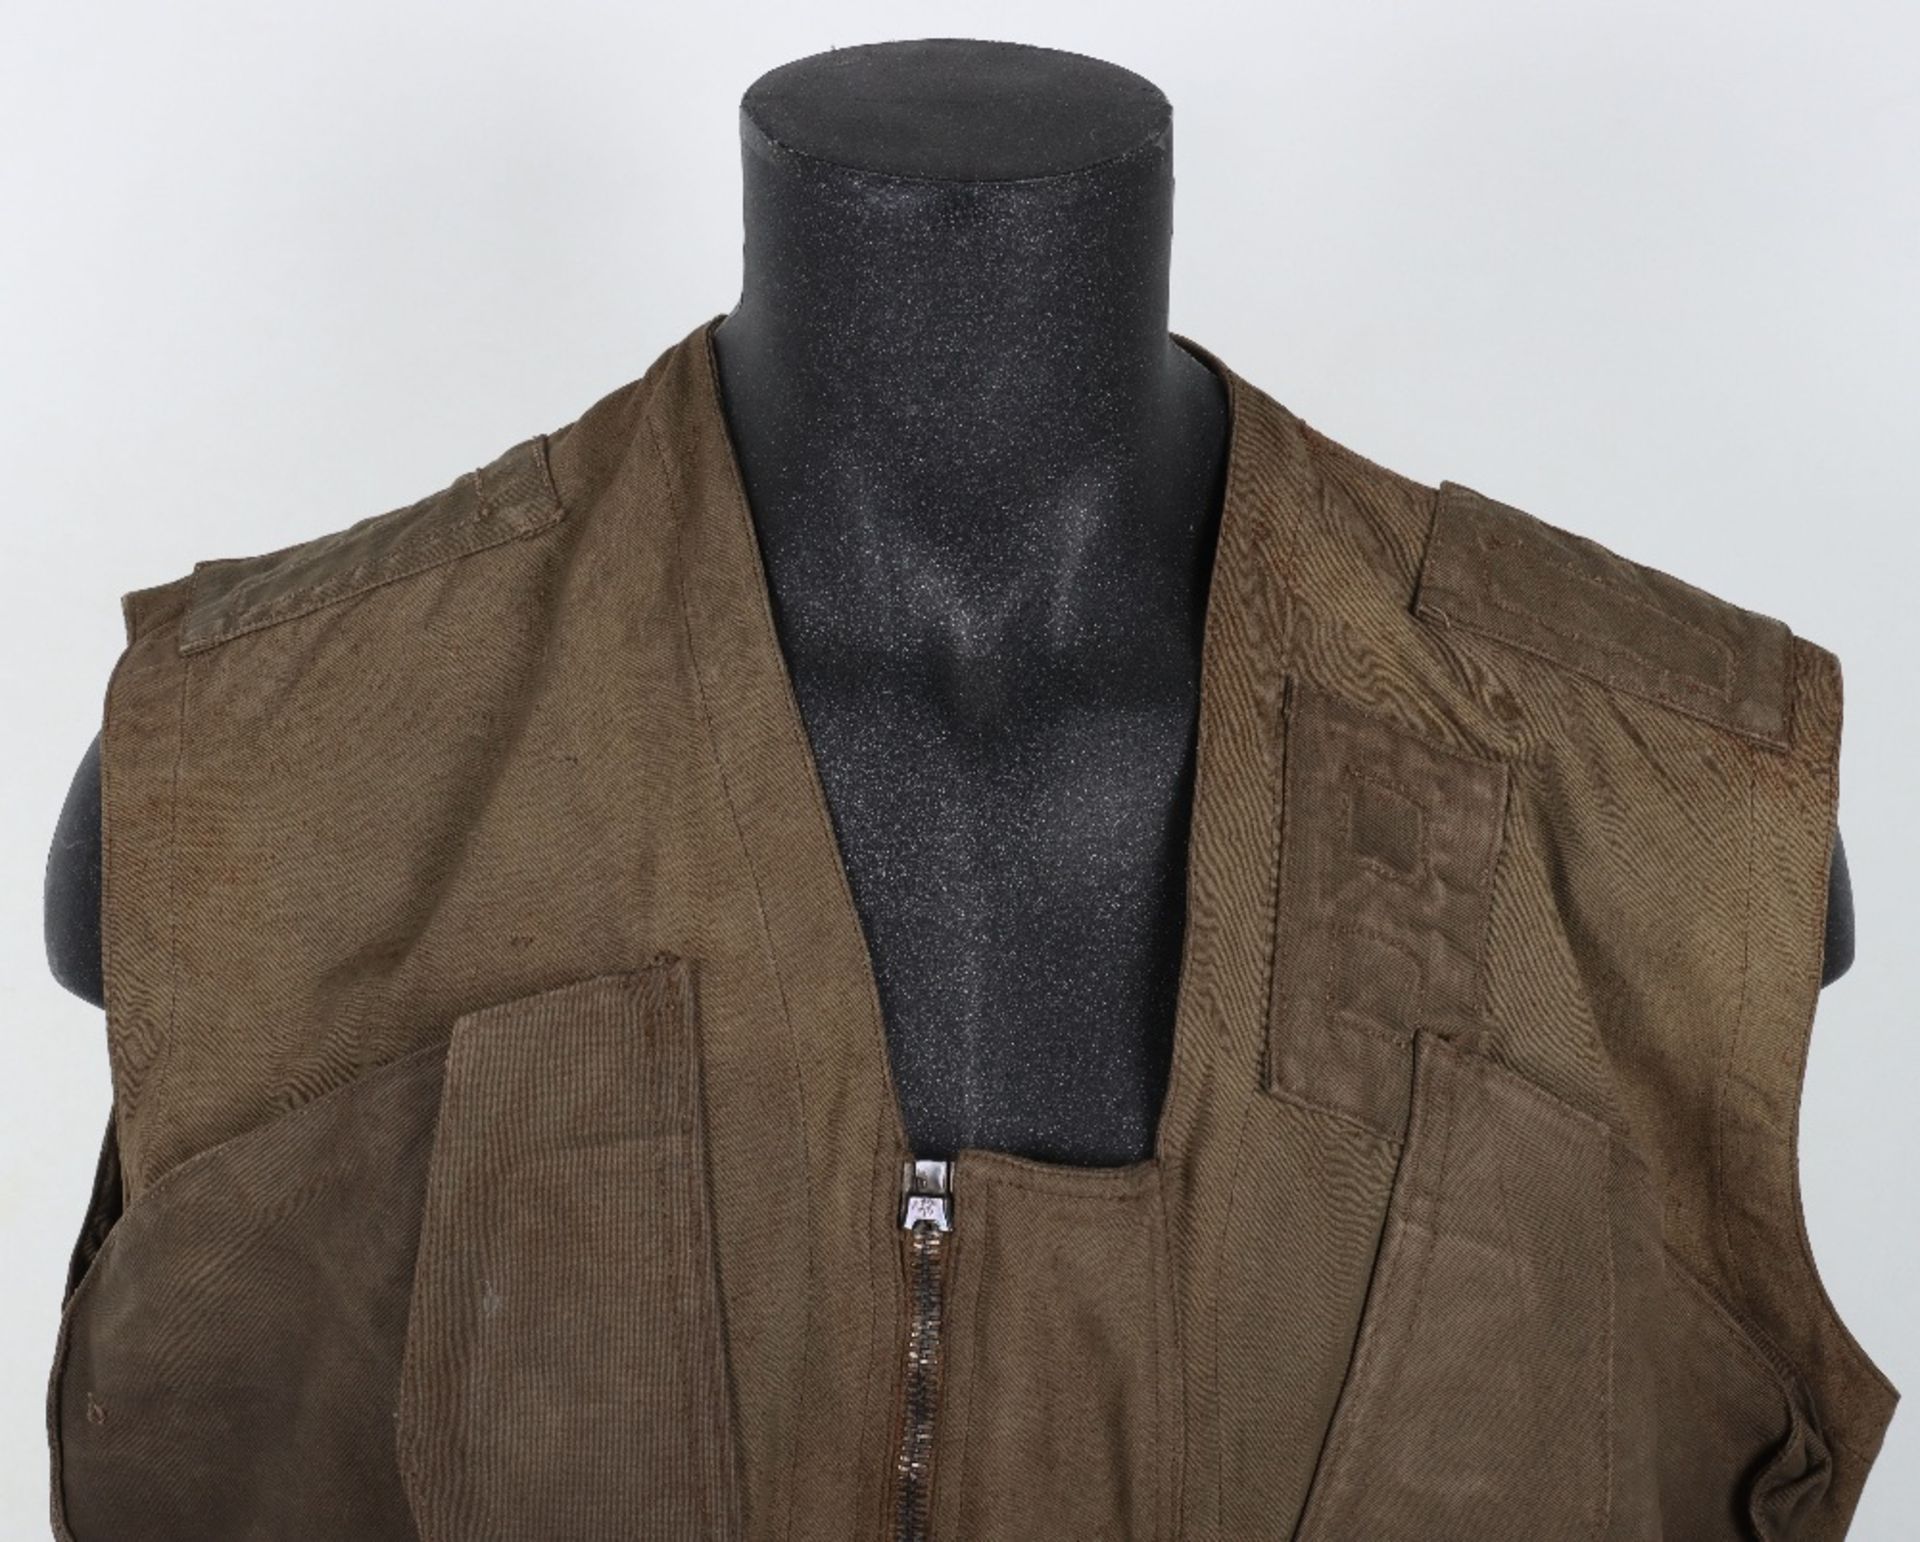 Rare Modified Irvin Jump Jacket Smock Used by the Polish Airborne Forces - Image 3 of 15